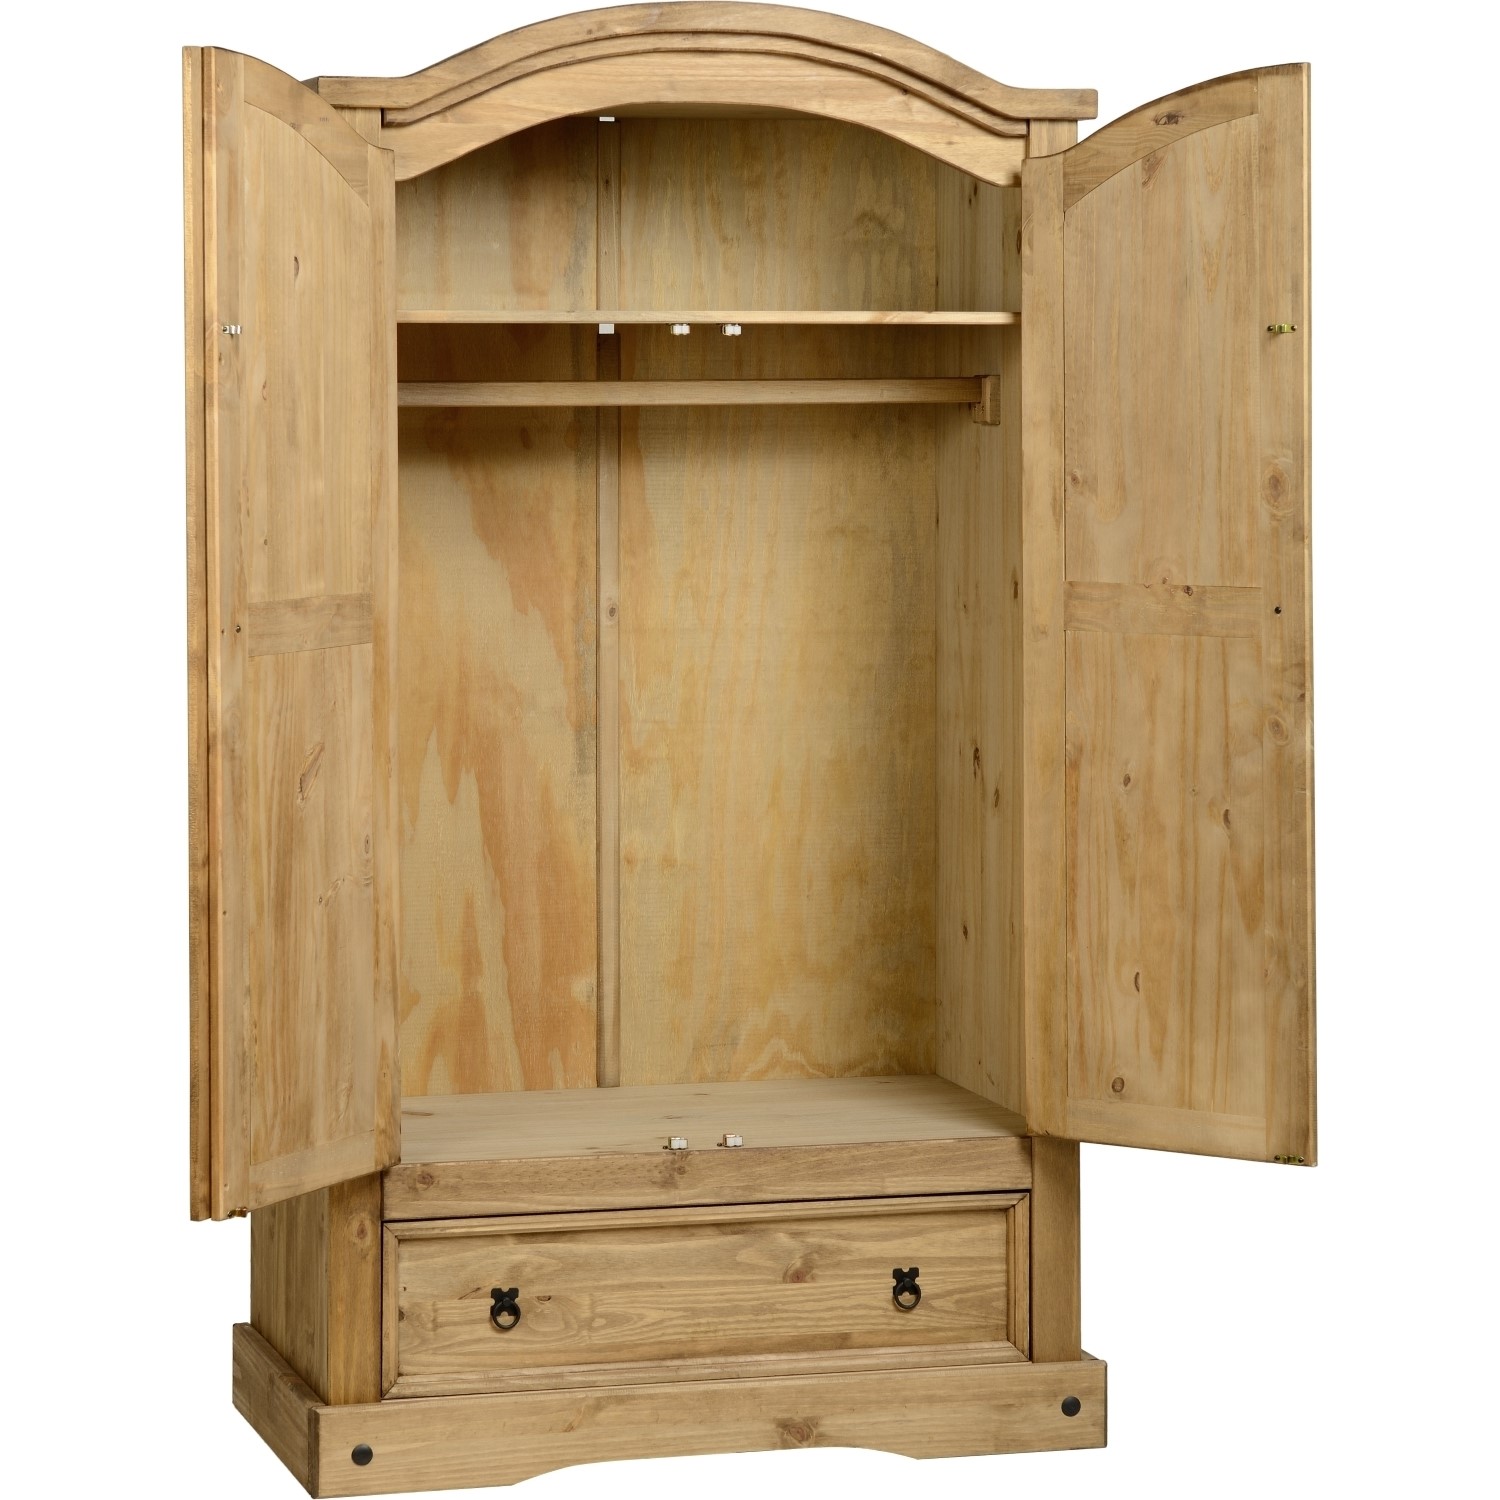 Read more about Solid pine 2 door double wardrobe with drawer corona seconique